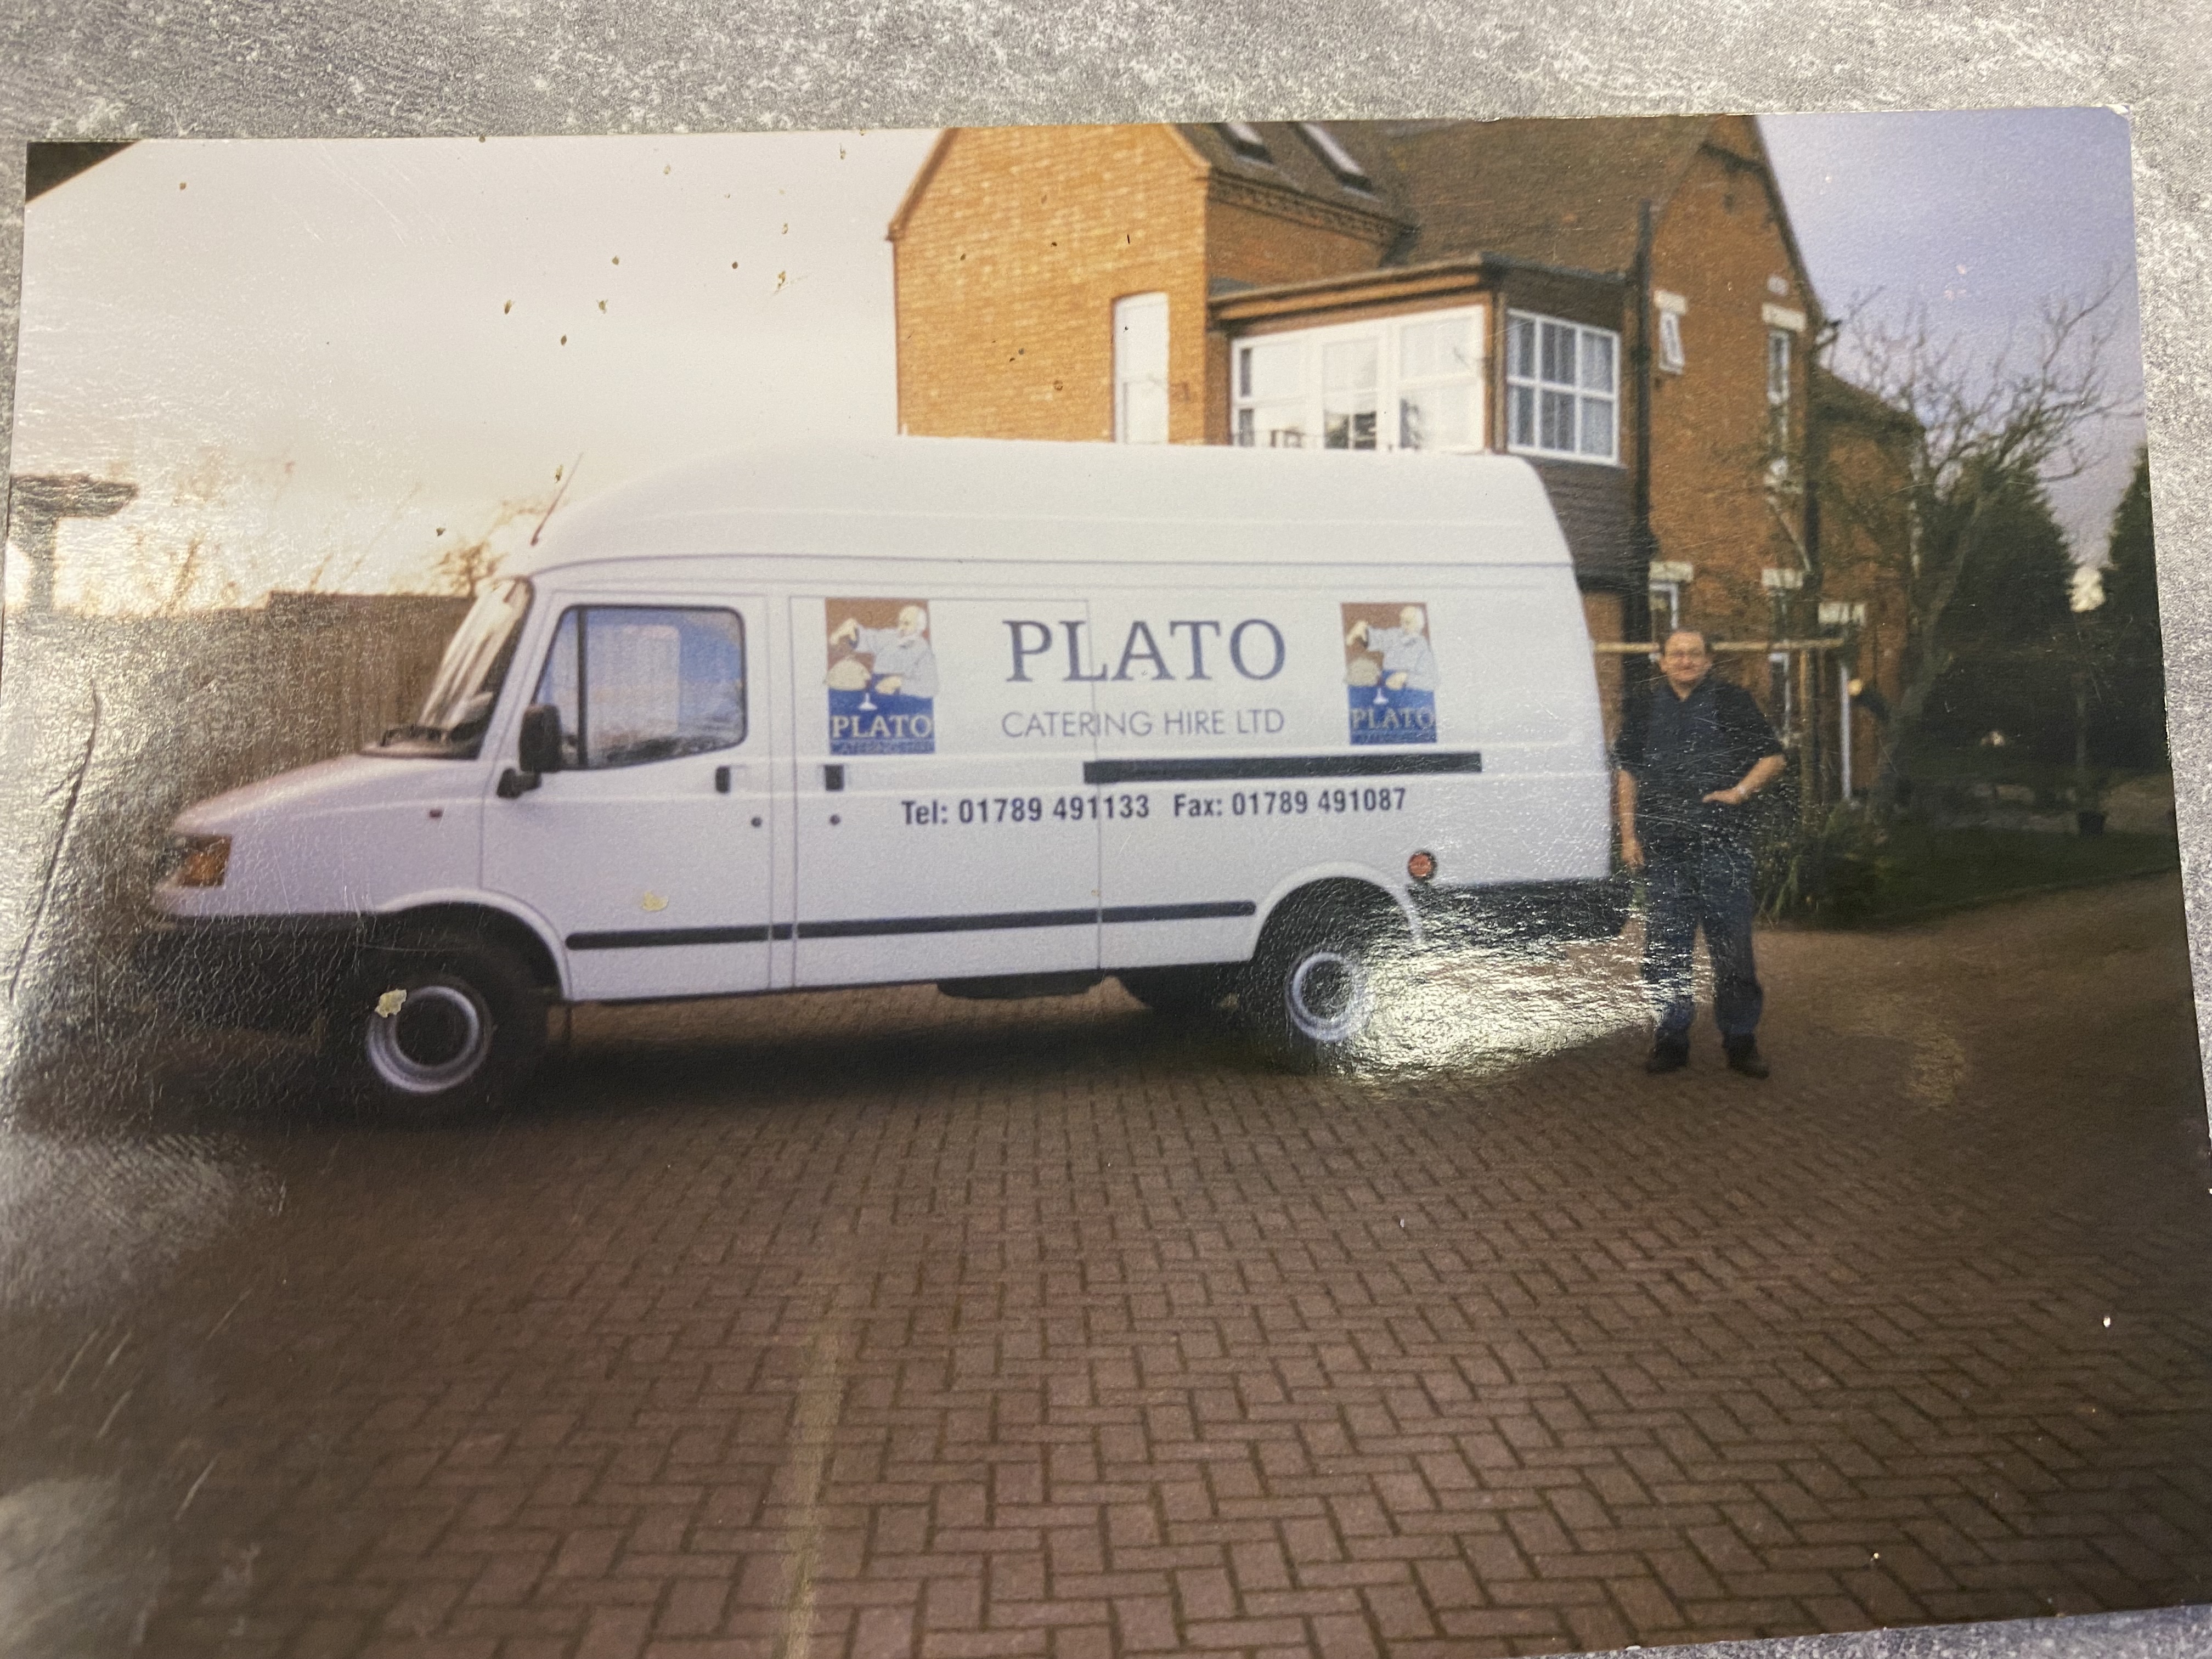 It started with a bet - Plato Catering Hire